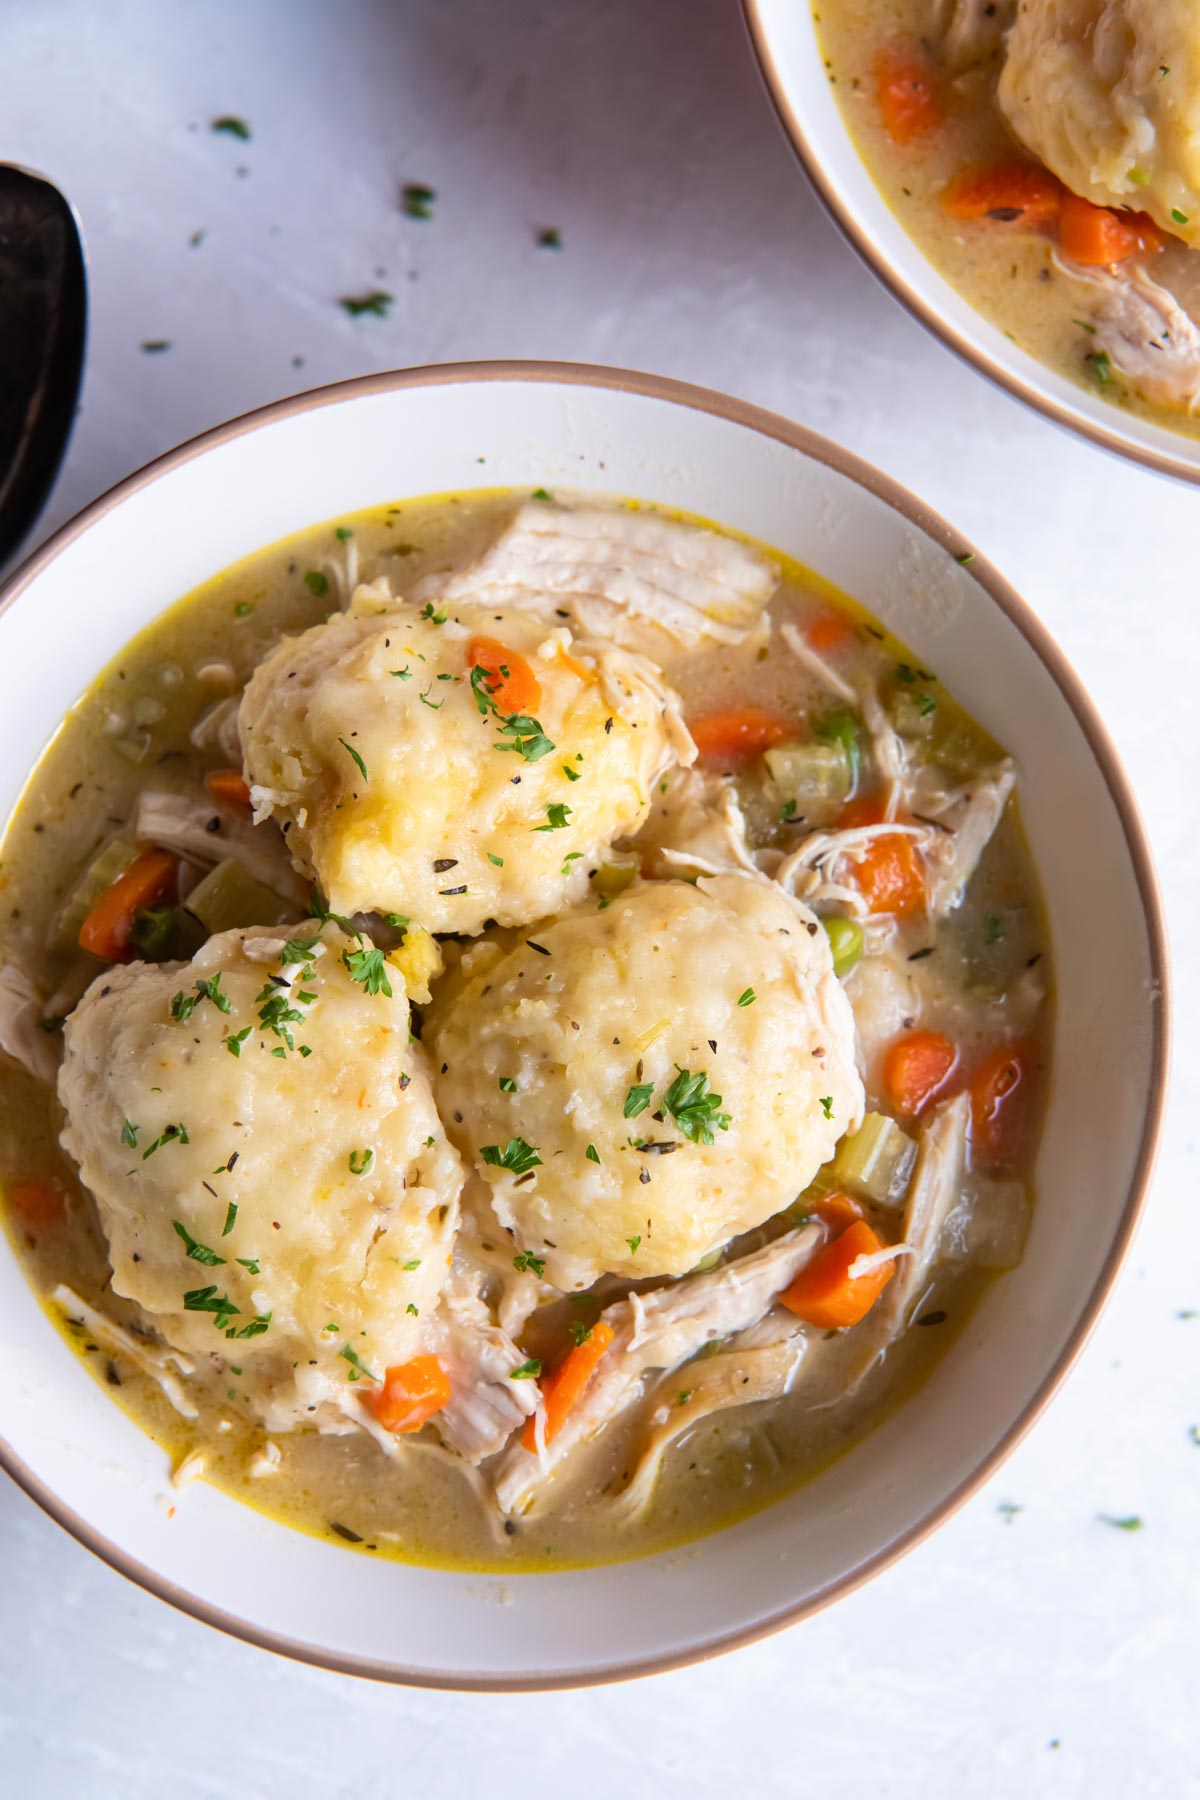 Chicken and dumplings served in a bowl.